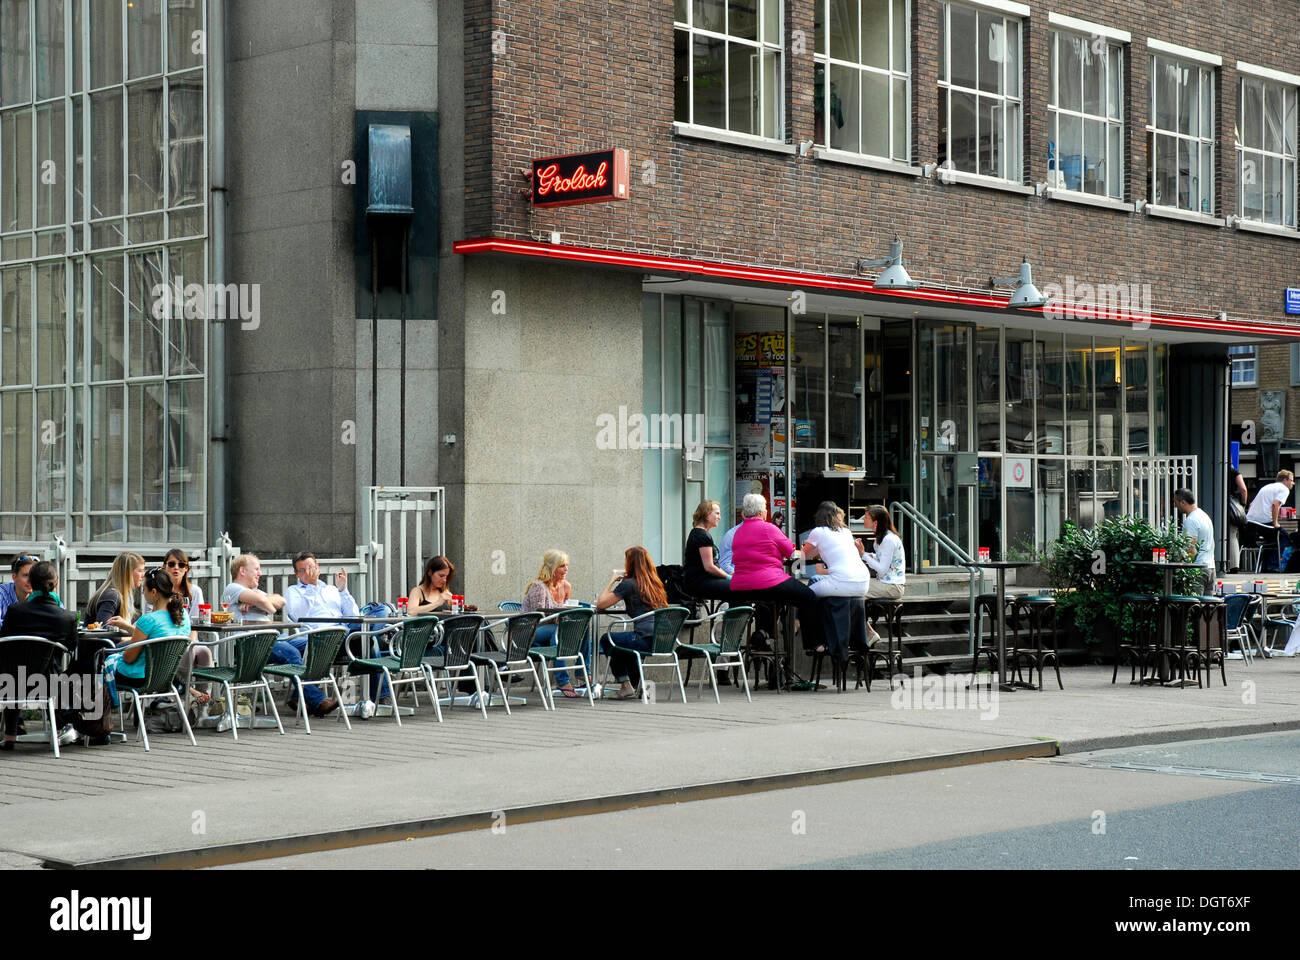 Dudok, pub cafe restaurant with a terrace on Meent street, Rotterdam, Zuid-Holland, South-Holland, Netherlands, Europe Stock Photo